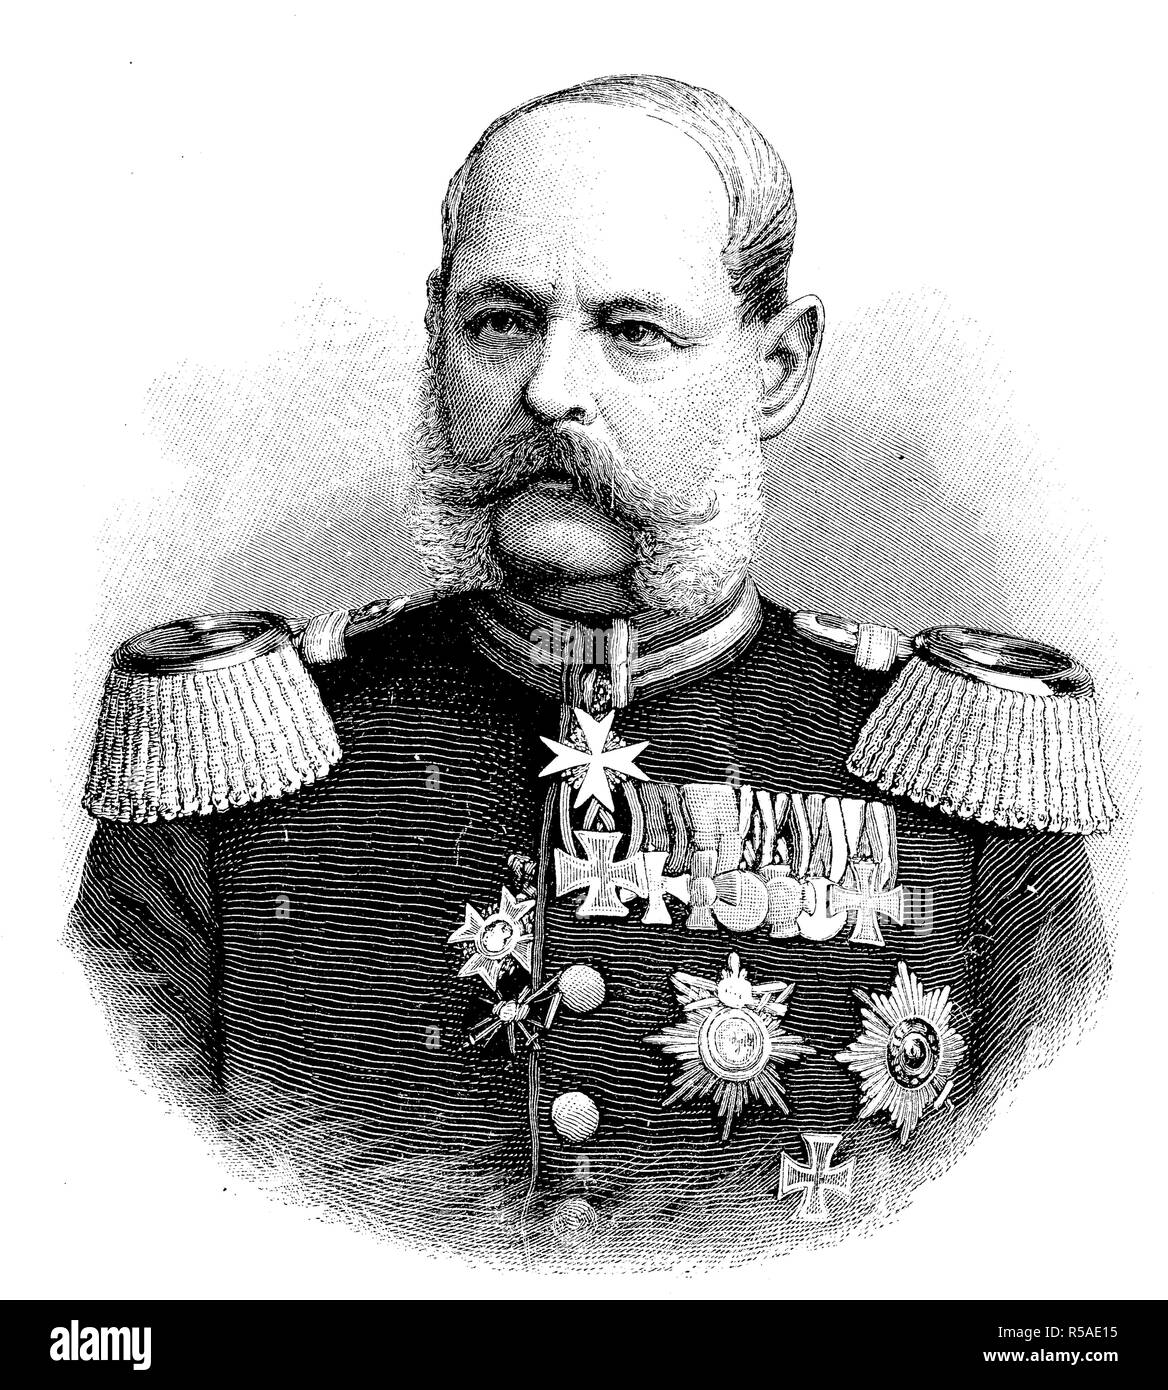 Alexander August Wilhelm von Pape, February 2, 1813, May 7, 1895, was a Royal Prussian infantry Colonel-General with the special Stock Photo